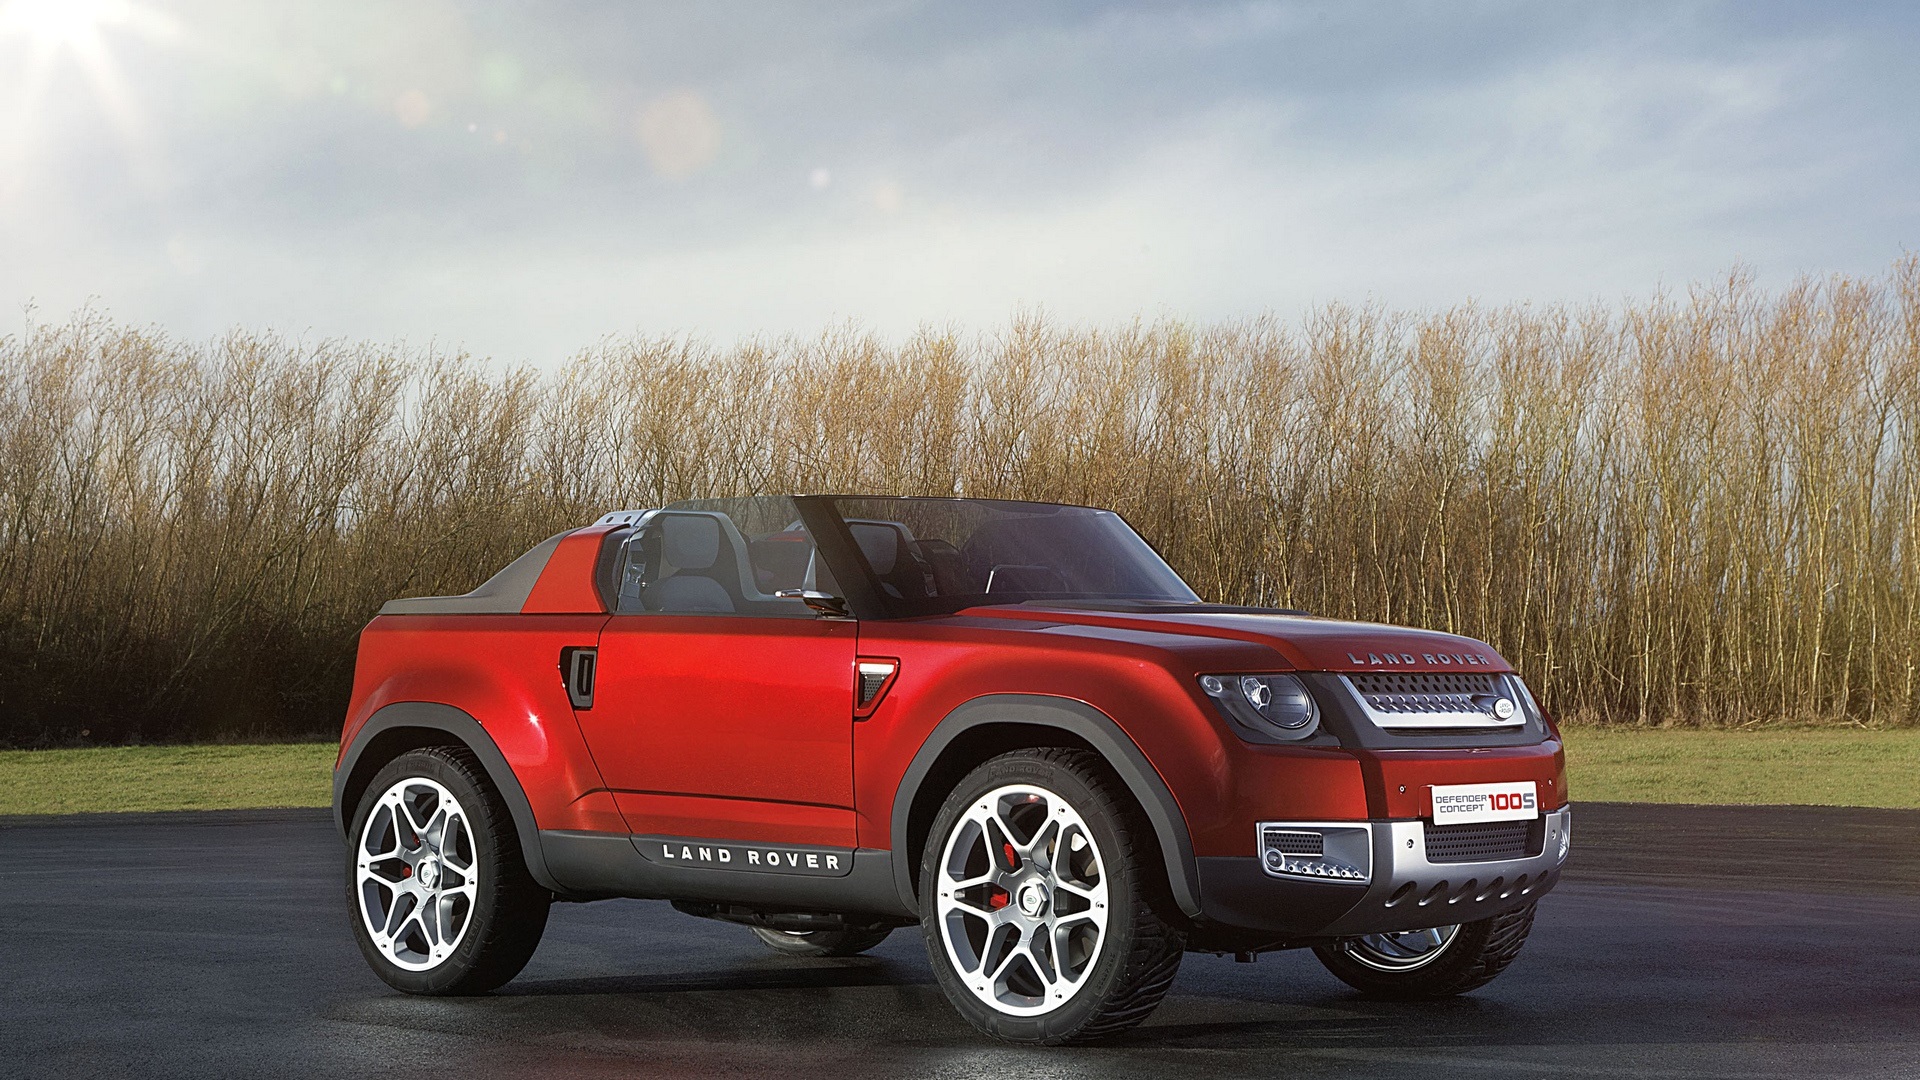 General 1920x1080 car nature Land Rover Land Rover DC100 concept cars British cars